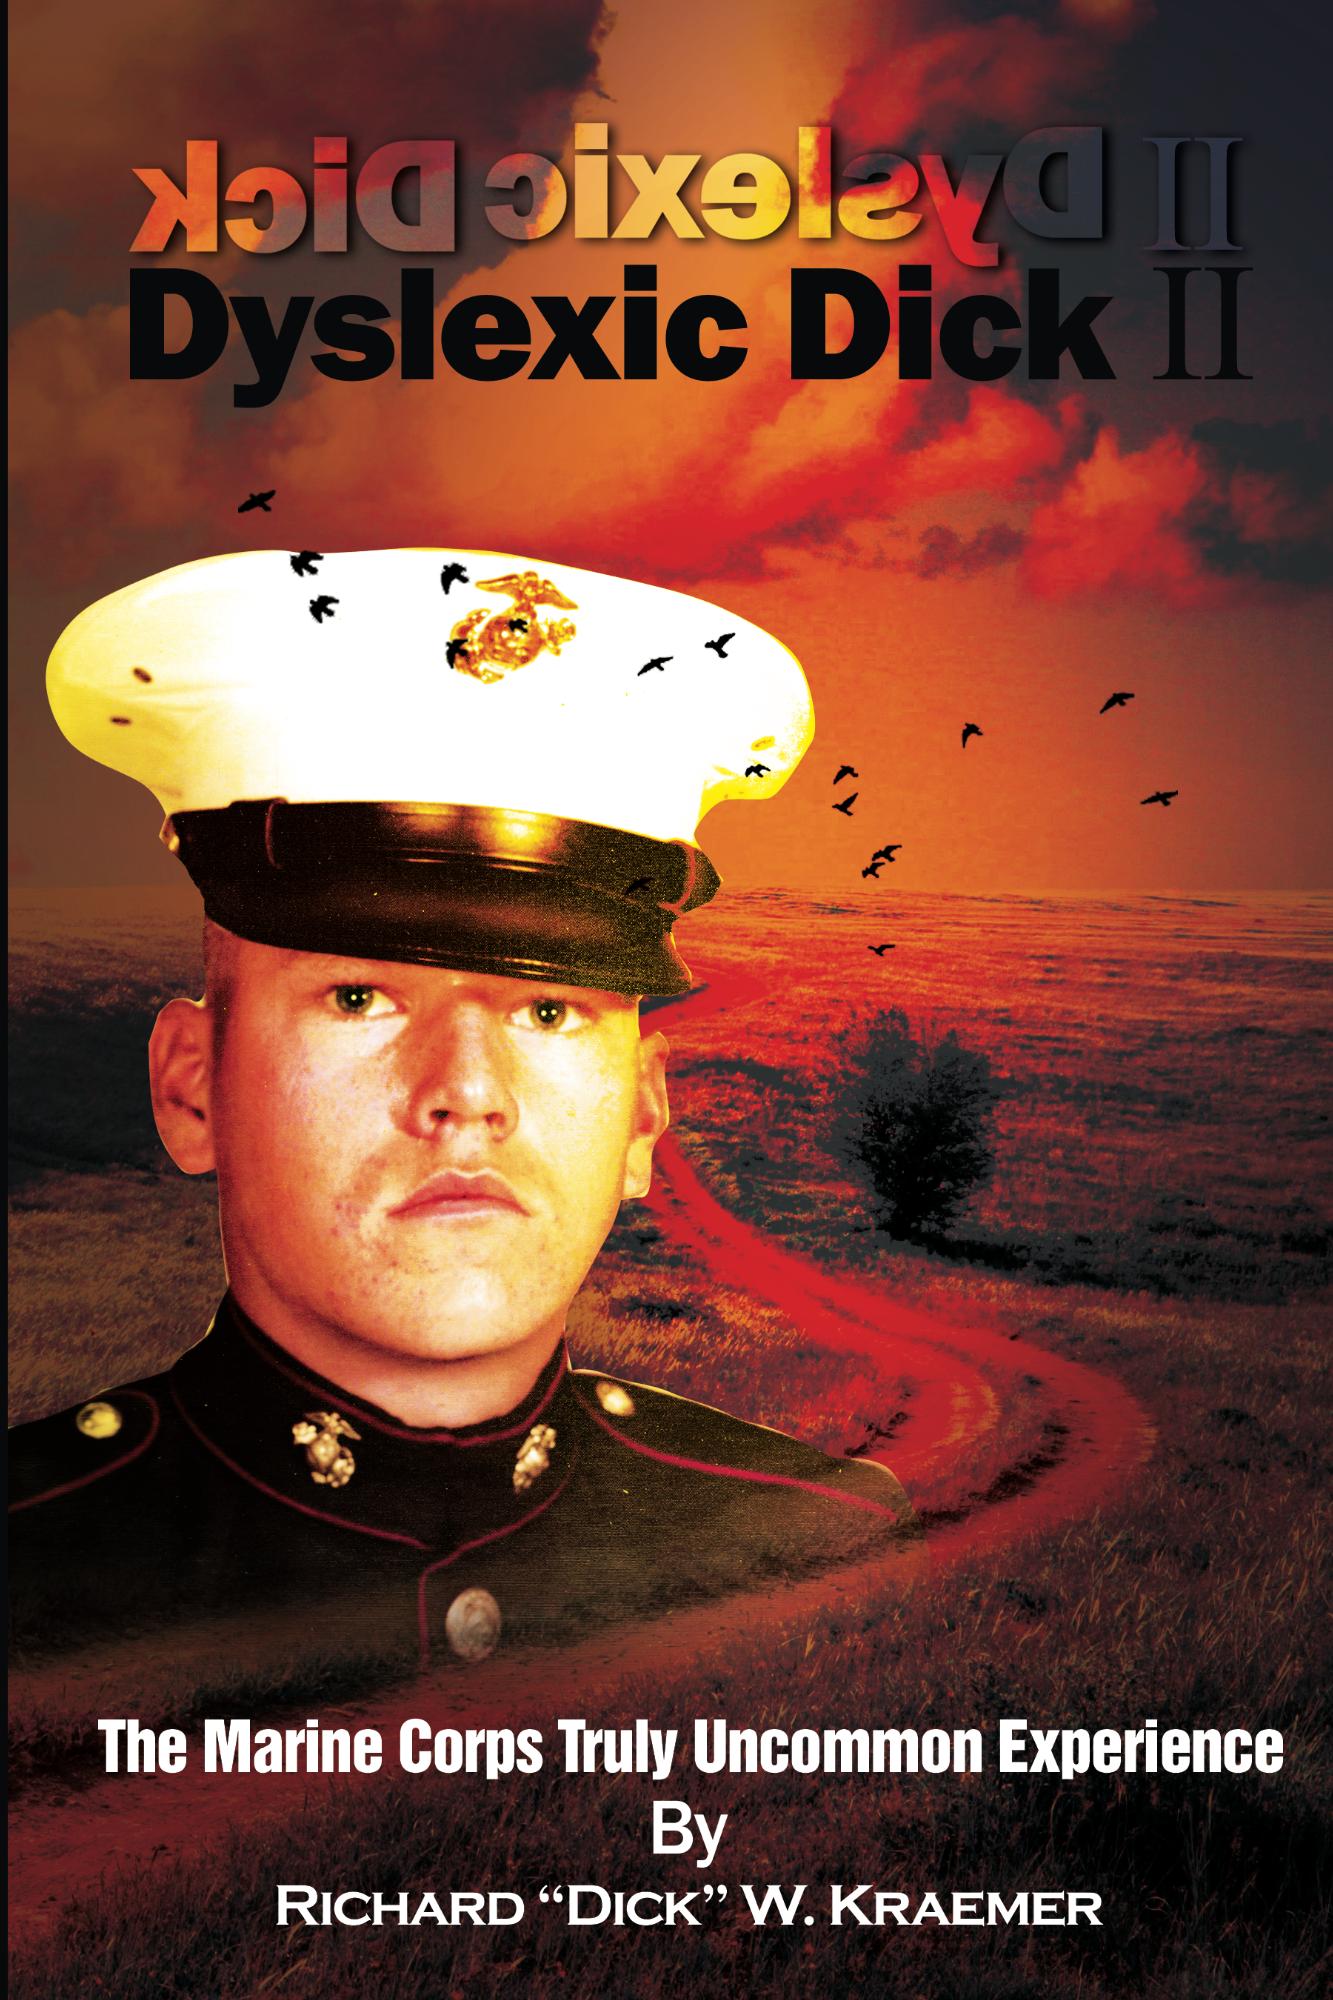 Dyslexic Dick II: The Marine Corps Truly Uncommon Experience